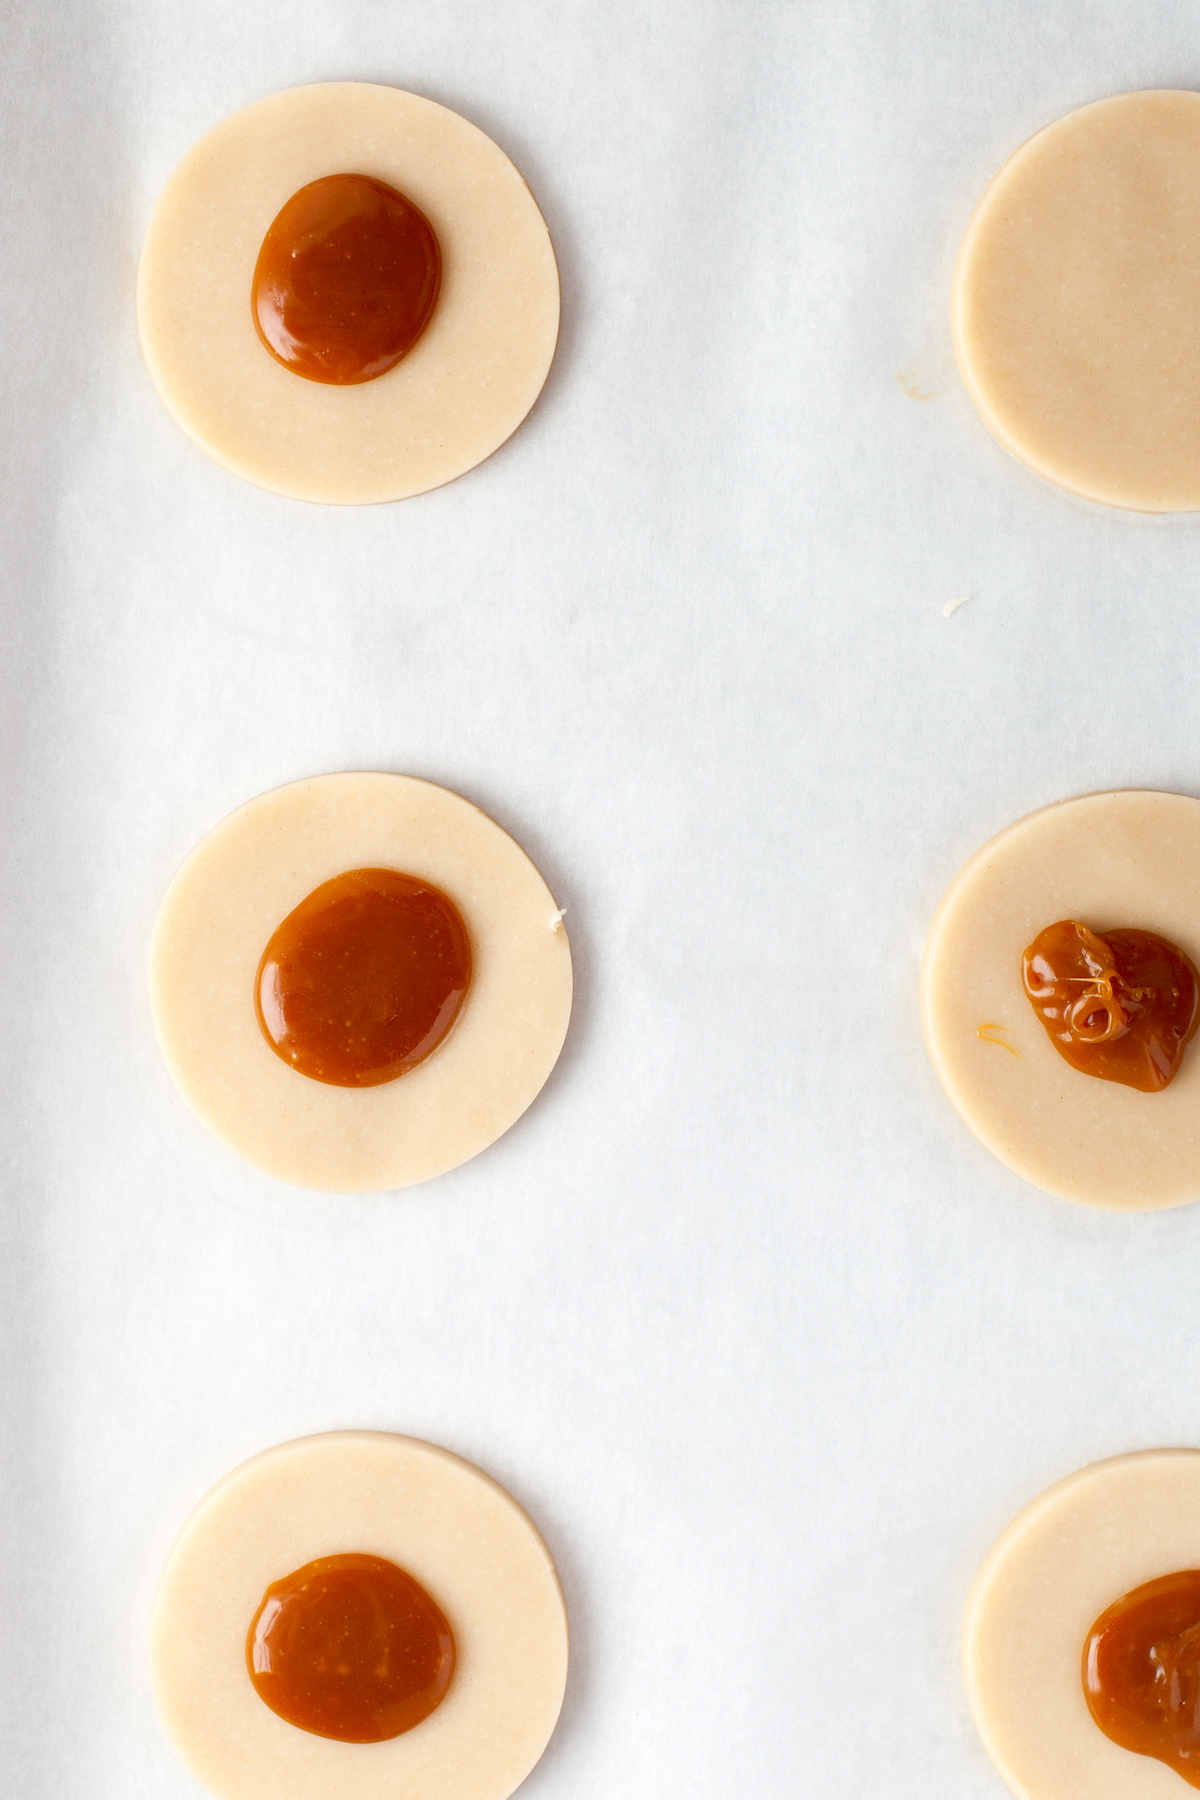 Add caramel to the center of the dough